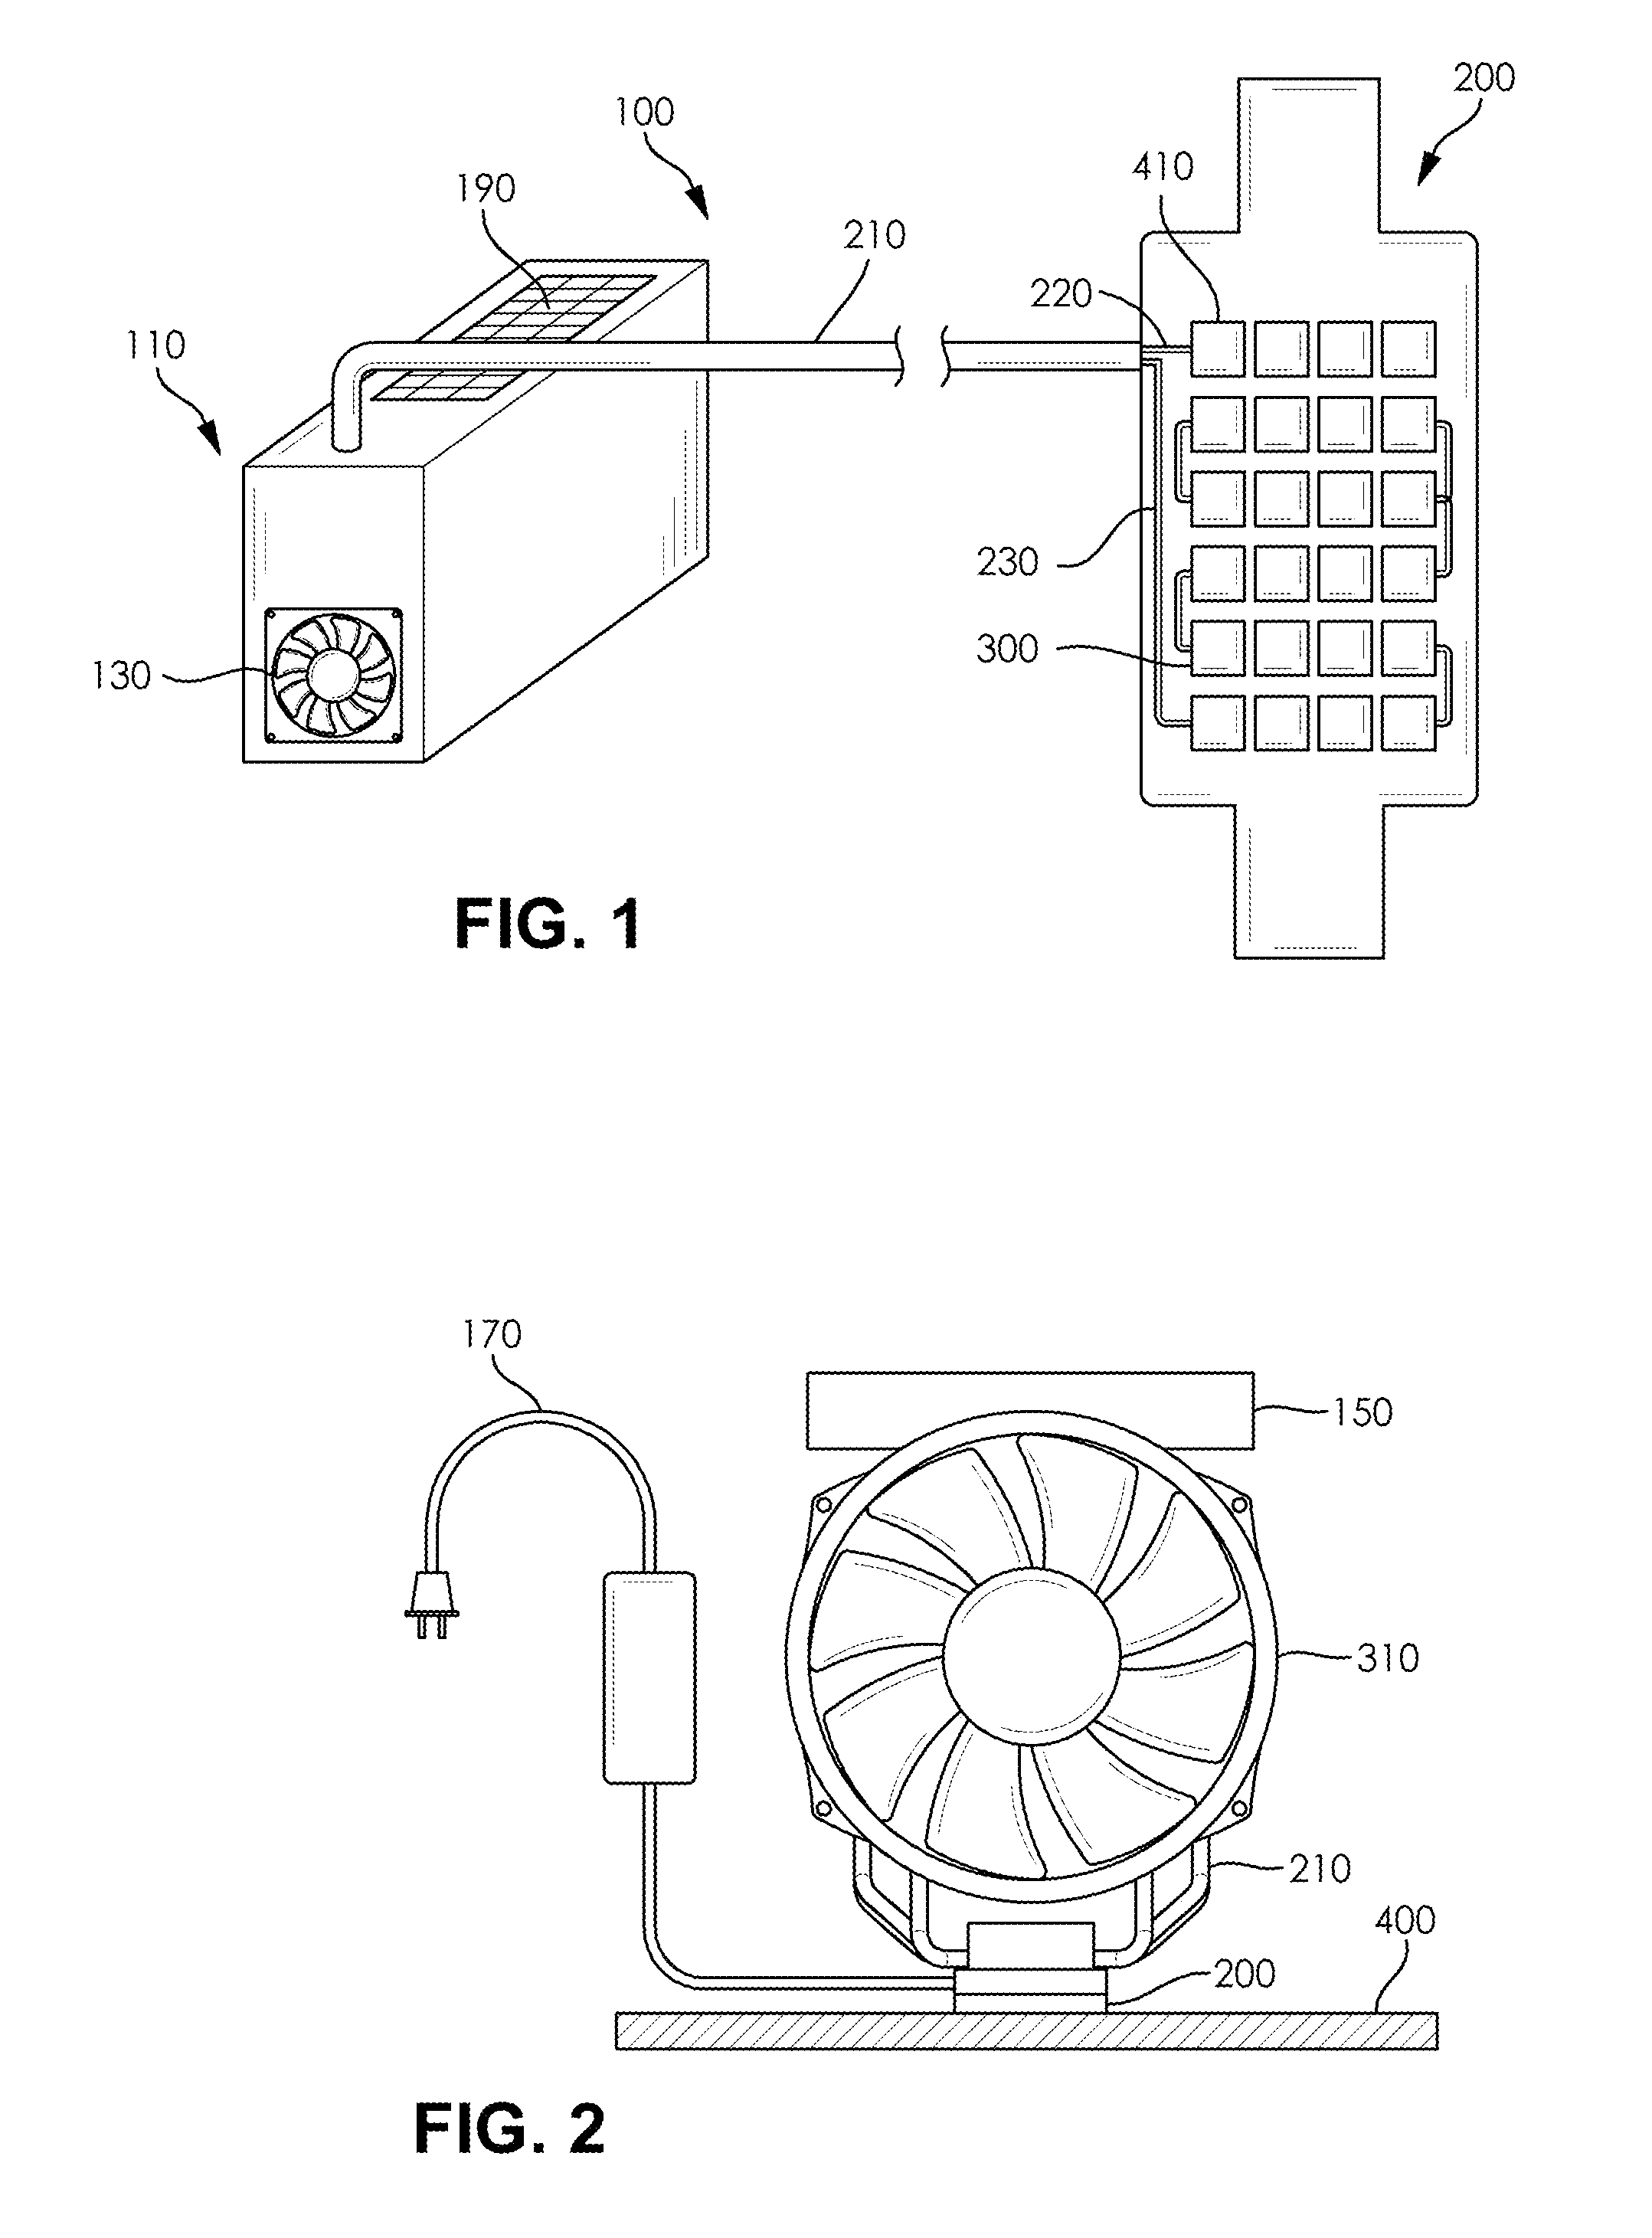 Alternating hot and cold therapy apparatus